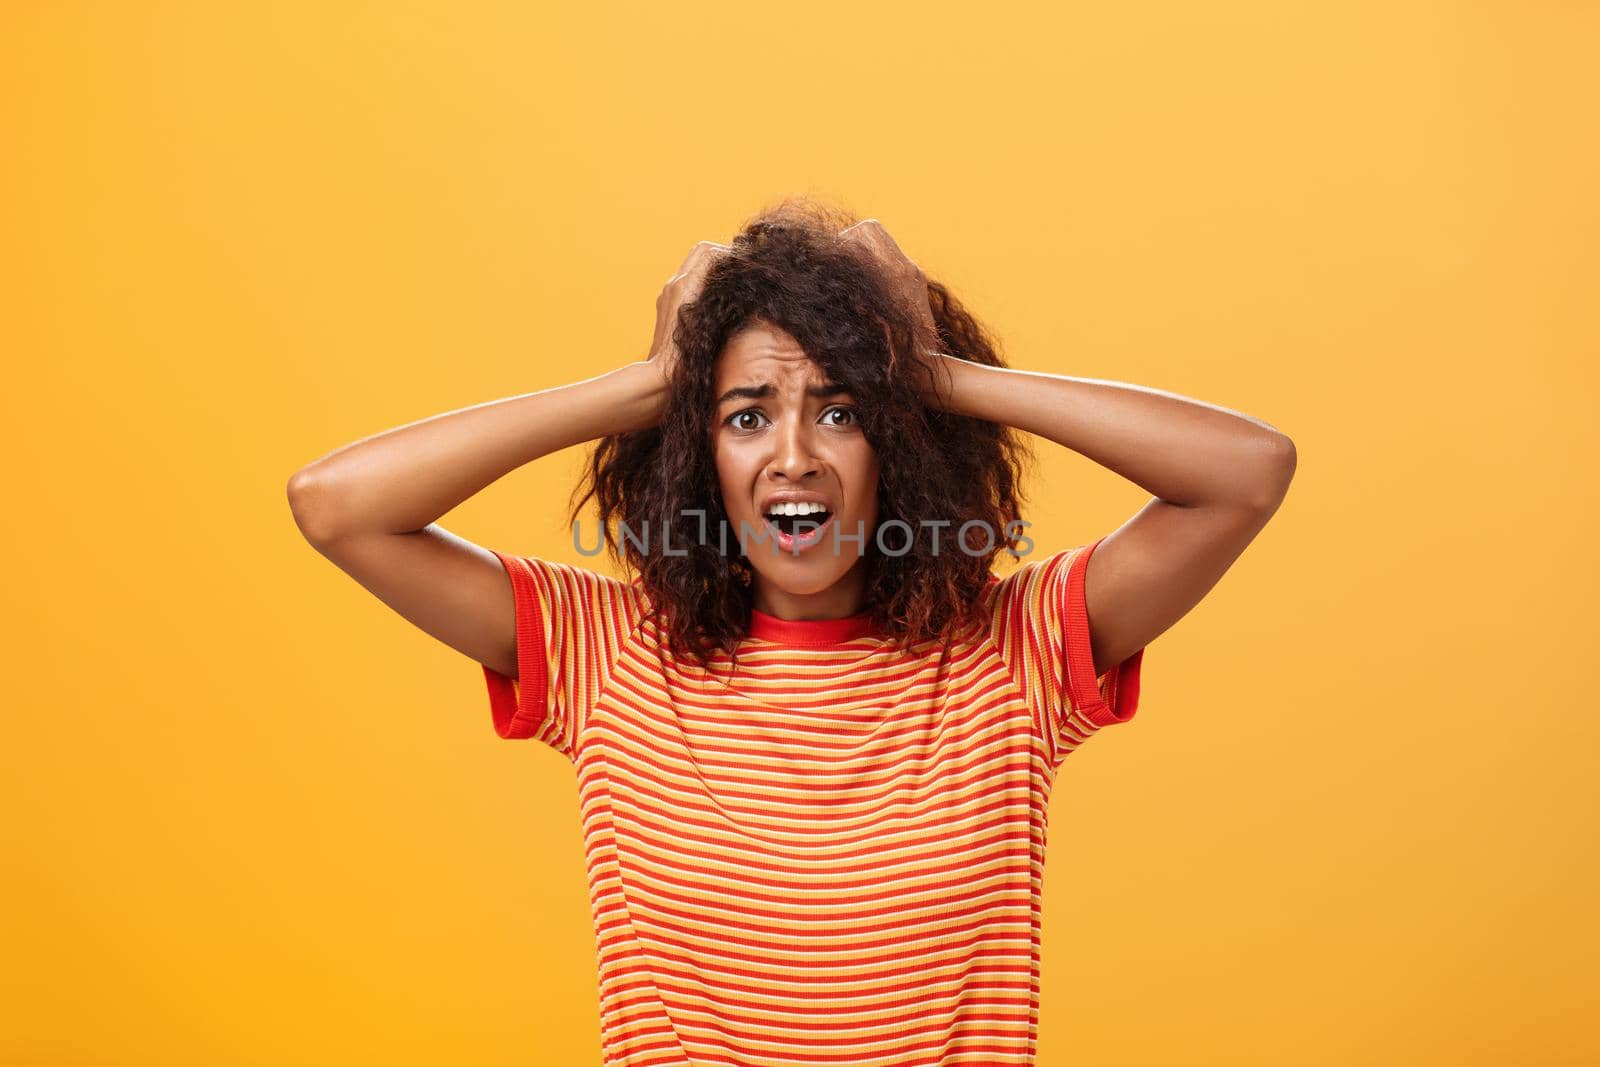 Waist-up shot of concerned shocked and troubled african-american woman with afro hairstyle holding hands on hair frowning looking worried and itnense at camera feeling stressed and nervous. Copy space